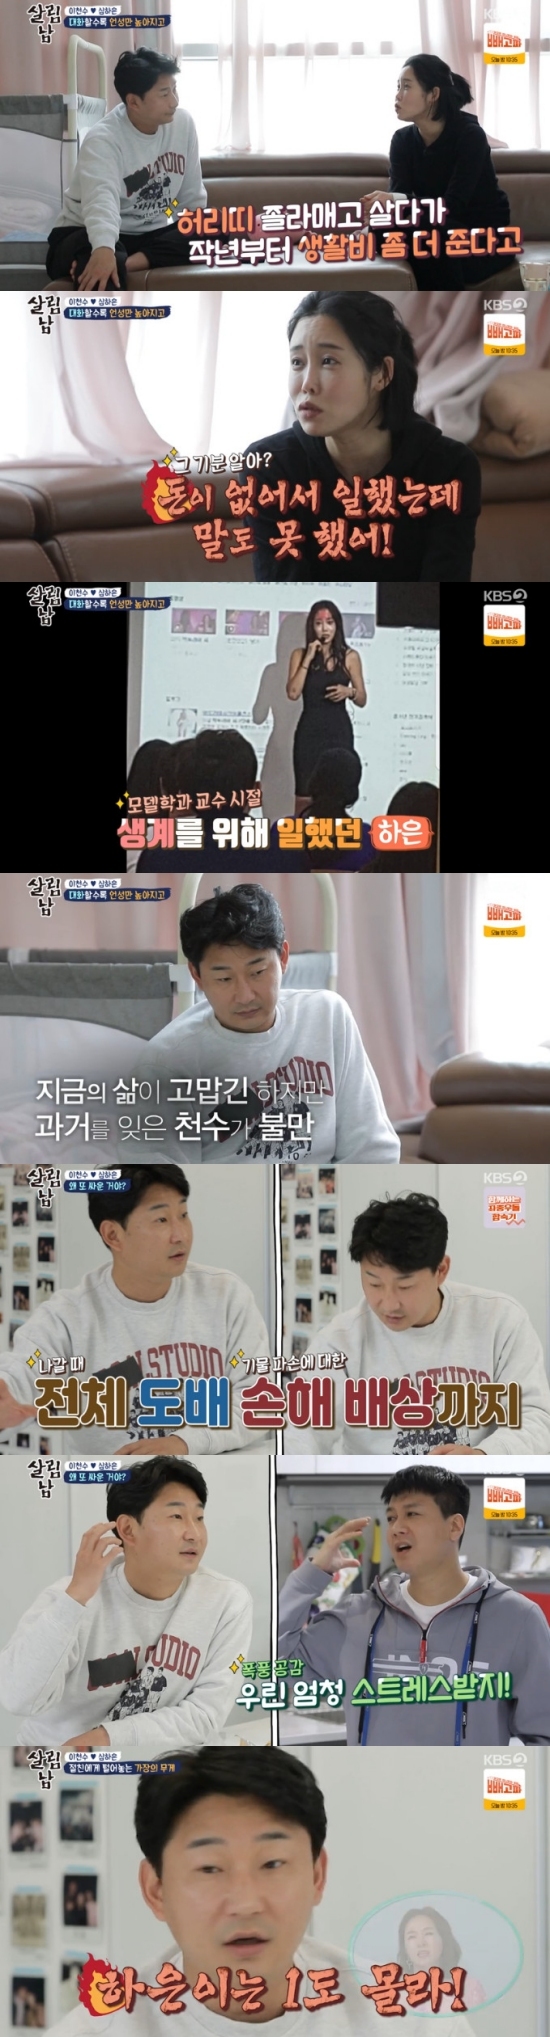 Former footballer Lee Chun-soo and model Shim Ha-eun are all over the home economy issue.On the 7th KBS 2TV Saving Men Season 2, Lee Chun-soo and Shim Ha-eun were in a fight and reconciliation scene.Shim Ha-eun painted on the wall with his children, and Lee Chun-soo said, What if you scribble on the wall? Its money to do it later.Its important that kids play more than the dough, its all kids houses, Shim Ha-eun said, adding: Its not our home, its a pre-set house.I have to do it when I go out and go out. Lee Chun-soo said, I go out and make money hard, do you think its easy to make money? Shim Ha-eun said, How beautiful are children to play well and draw pictures.I am drawing my family as my house. However, Lee Chun-soo said, I do not like me to do money money, but if you look at me, you do not think. Shim Ha-eun said, I do not talk too much.Im not doing much of that wall, he said.Lee Chun-soo said, I hate this one, not much. I hate this one.I do not have work every day, and you do not think it, said Shim Ha-eun, who said, Is there four people who live without thinking in my brothers eyes?I am sick of my brother and I am sorry. What is so hard and uneasy and what is so painful? Lee Chun-soo said: Theres no fixed program, you get off and you get a different income, you dont have a salary, you cant talk to yourself, you cant talk, you can easily do.You can wipe it out, he said, and every time I do it, I think, What more do I have to do?Shim Ha-eun also said, Have you ever said something to your brother once? When I was anxious about the future, I did not say a word.I have never seen my brothers salary high when he talks about his salary. Lee Chun-soo nailed it because of me so far, youve been living so far, while Shim Ha-eun said, Because of your brother? No.I didnt open my hands once or twice. Thats why I ate. You ever get more money to him.Why do you want to live with your belt and give you more living expenses from A Year Ago in Winter?How hard have we lived until A Year Ago in Winter? People do. Why do you work? I did not even talk to you because I did not have money. Lee Chun-soo said: I feel good too, I have room. Thats not always money money. I think I gave it enough. I thought it was life.I thought I would be living on my salary on your salary. Shim Ha-eun said, My brother did not earn the family, but because he earned it together. Who started with the childrens subscription account and who paid the savings?What about the refrigerator above. A penny or two. You bought a monitor for a game. Save that. Dont spare this wallpaper. Lee Chun-soo then visited his best friend Kim Seung-hyun and complained.Lee Chun-soo explained the self-inflicted situation, and Kim Seung-hyun sided with Lee Chun-soo.Late on, Shim Ha-eun arrived at Kim Seung-hyeuns home.Kim Seung-hyeun was in a relationship with Shim Ha-eun, and it was revealed that Lee Chun-soo invited Shim Ha-eun after he decided to come.Shim Ha-eun said there was wallpaper he received from an interior company, and refuted Lee Chun-soo, who said he didnt spend money on him, saying he bought a golf club.Kim Seung-hyeun, who wrapped Lee Chun-soo, sympathized with Shim Ha-euns position, and Shim Ha-eun and Lee Chun-soo understood and reconciled each others positions.Shim Ha-eun said: I respect and understand my brothers position.I hope we have a little more room because we have lived in a harder situation. Lee Chun-soo vowed, I will be more planned and prepare to be happy in the future. Photo = KBS Broadcasting Screen